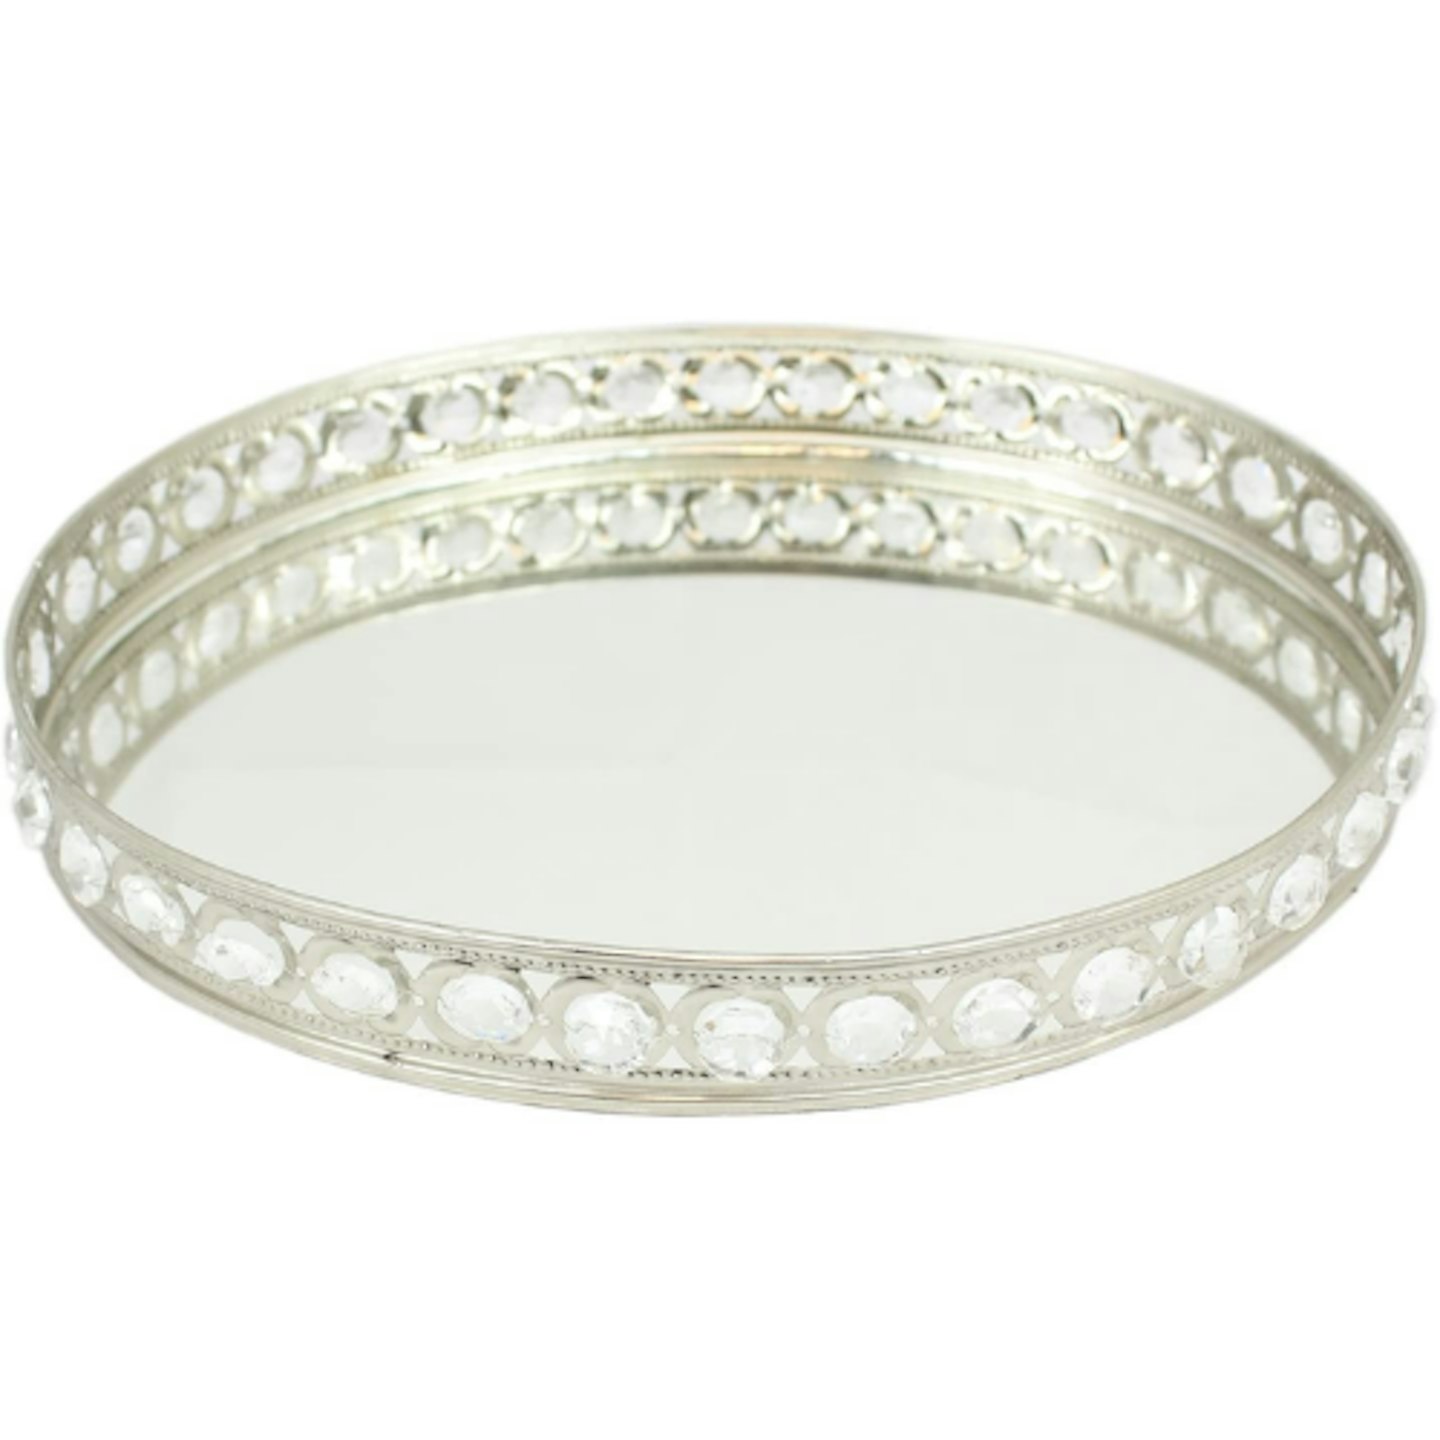 Oval Silver Mirrored Decorative Tray with Gemstones